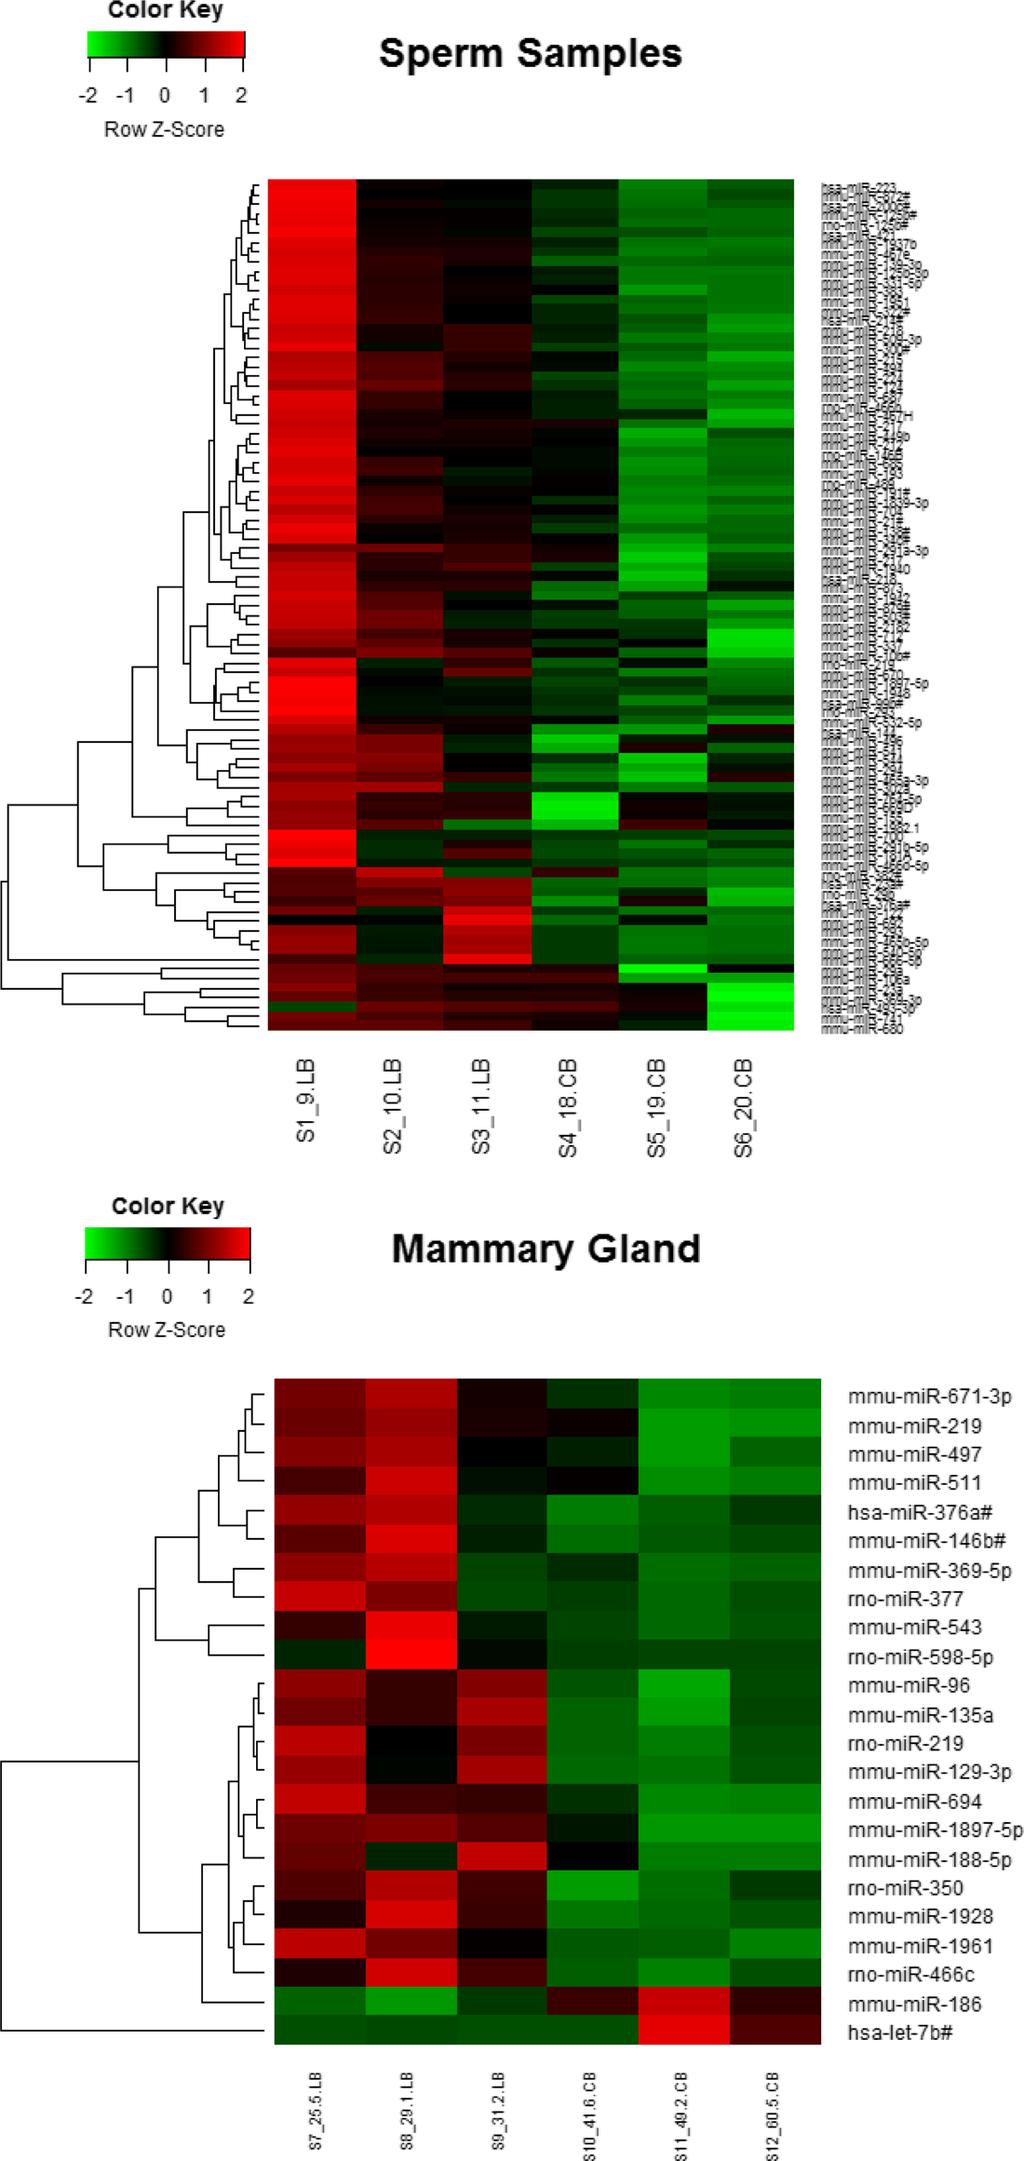 Fontelles et l. Brest Cncer Reserch (216) 18:71 Pge 9 of 13 A B Fig. 5 Het mp of microrna (mirna or mir) expression profiles.